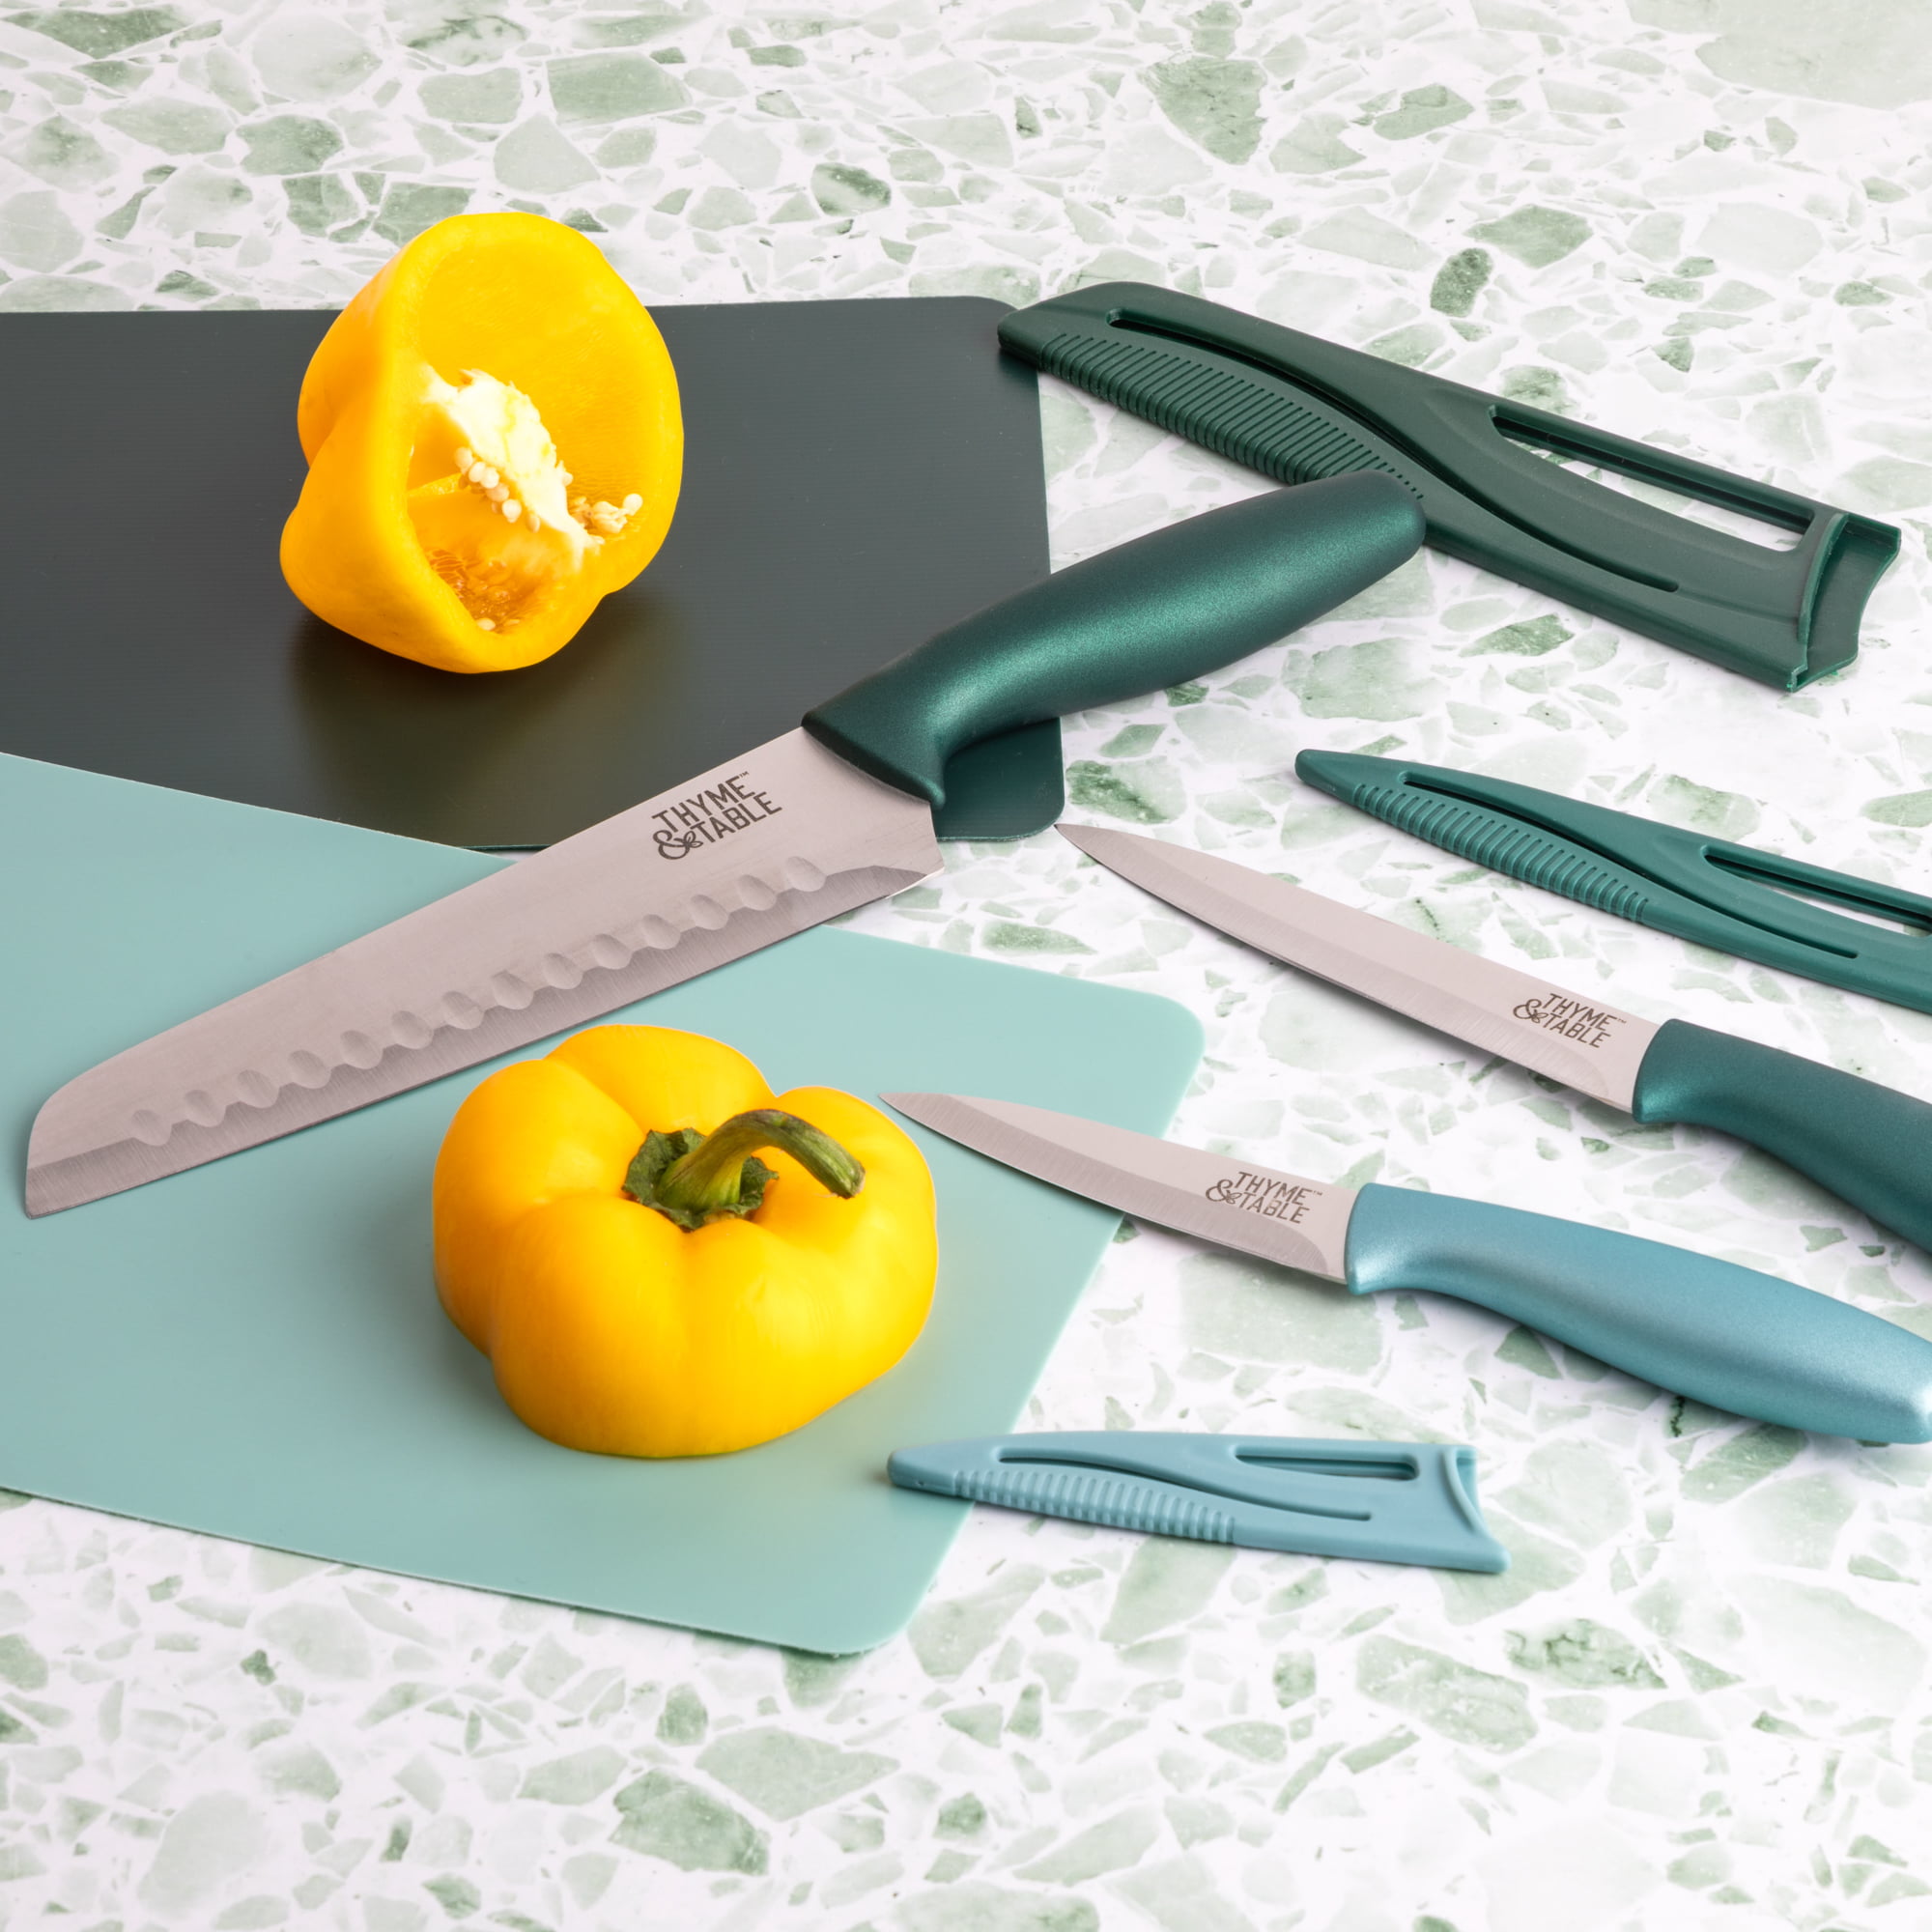 Thyme & Table Knife & Cutting Mat 5-Piece Set, Gold 